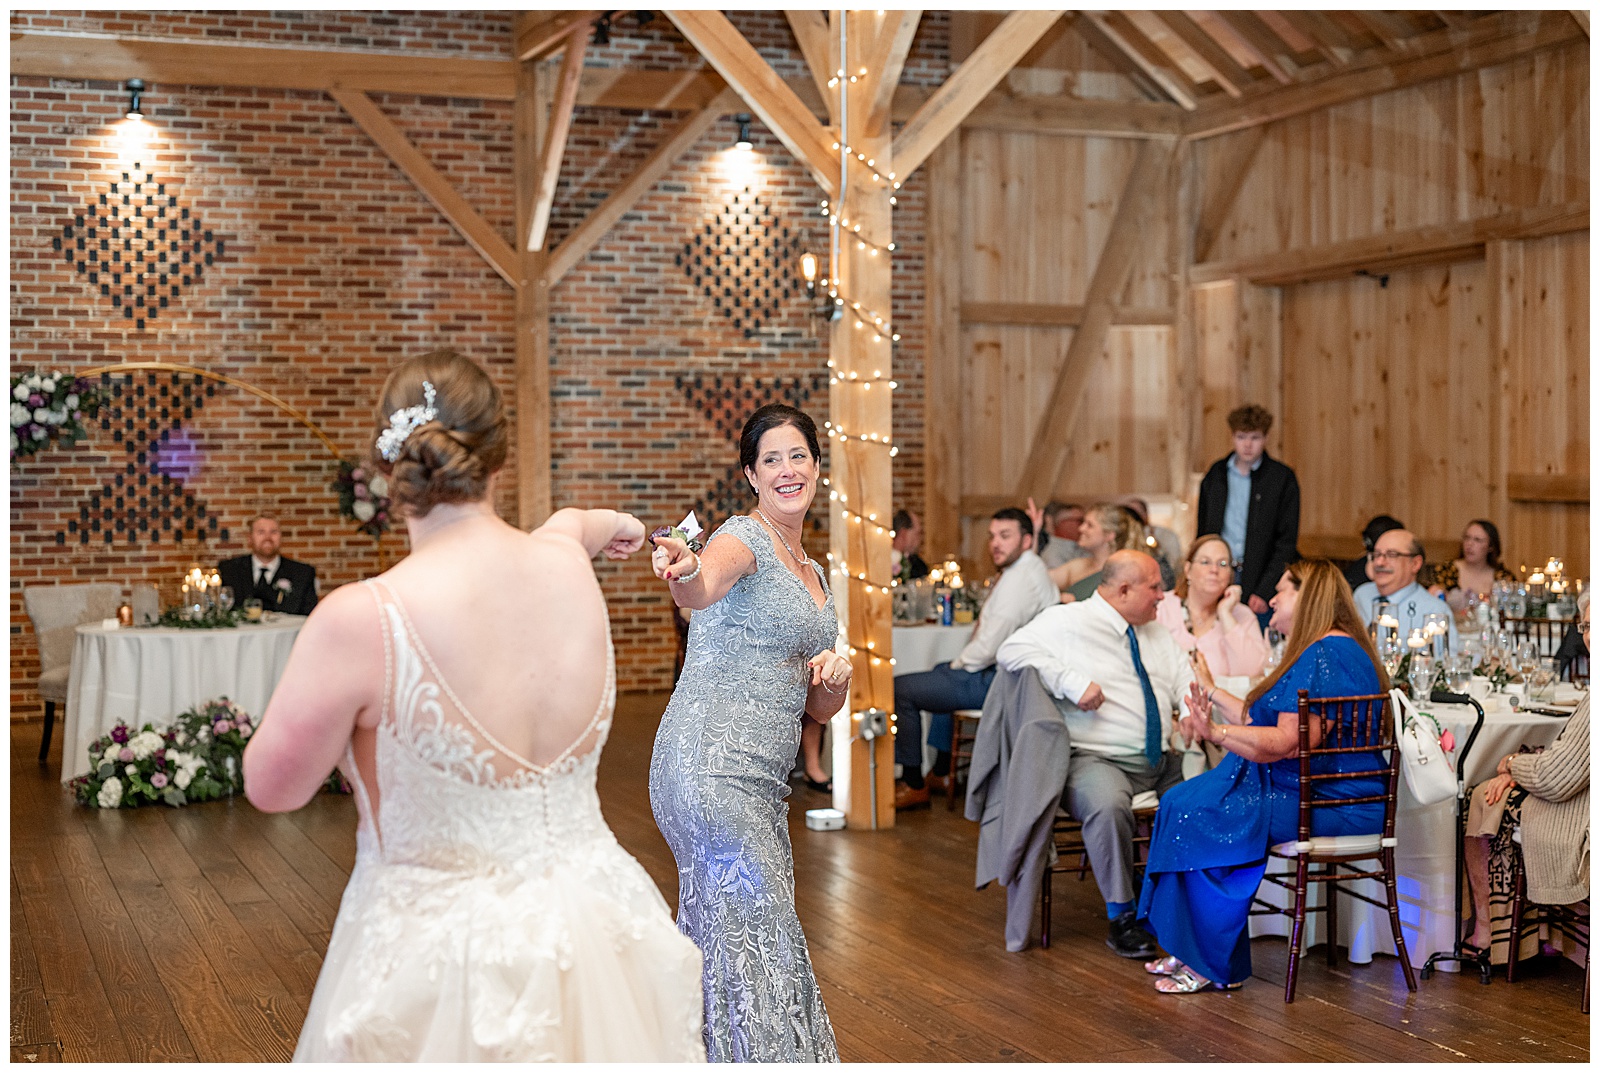 bride dancing with her mom as guests smile and watch at barn reception at brick gables